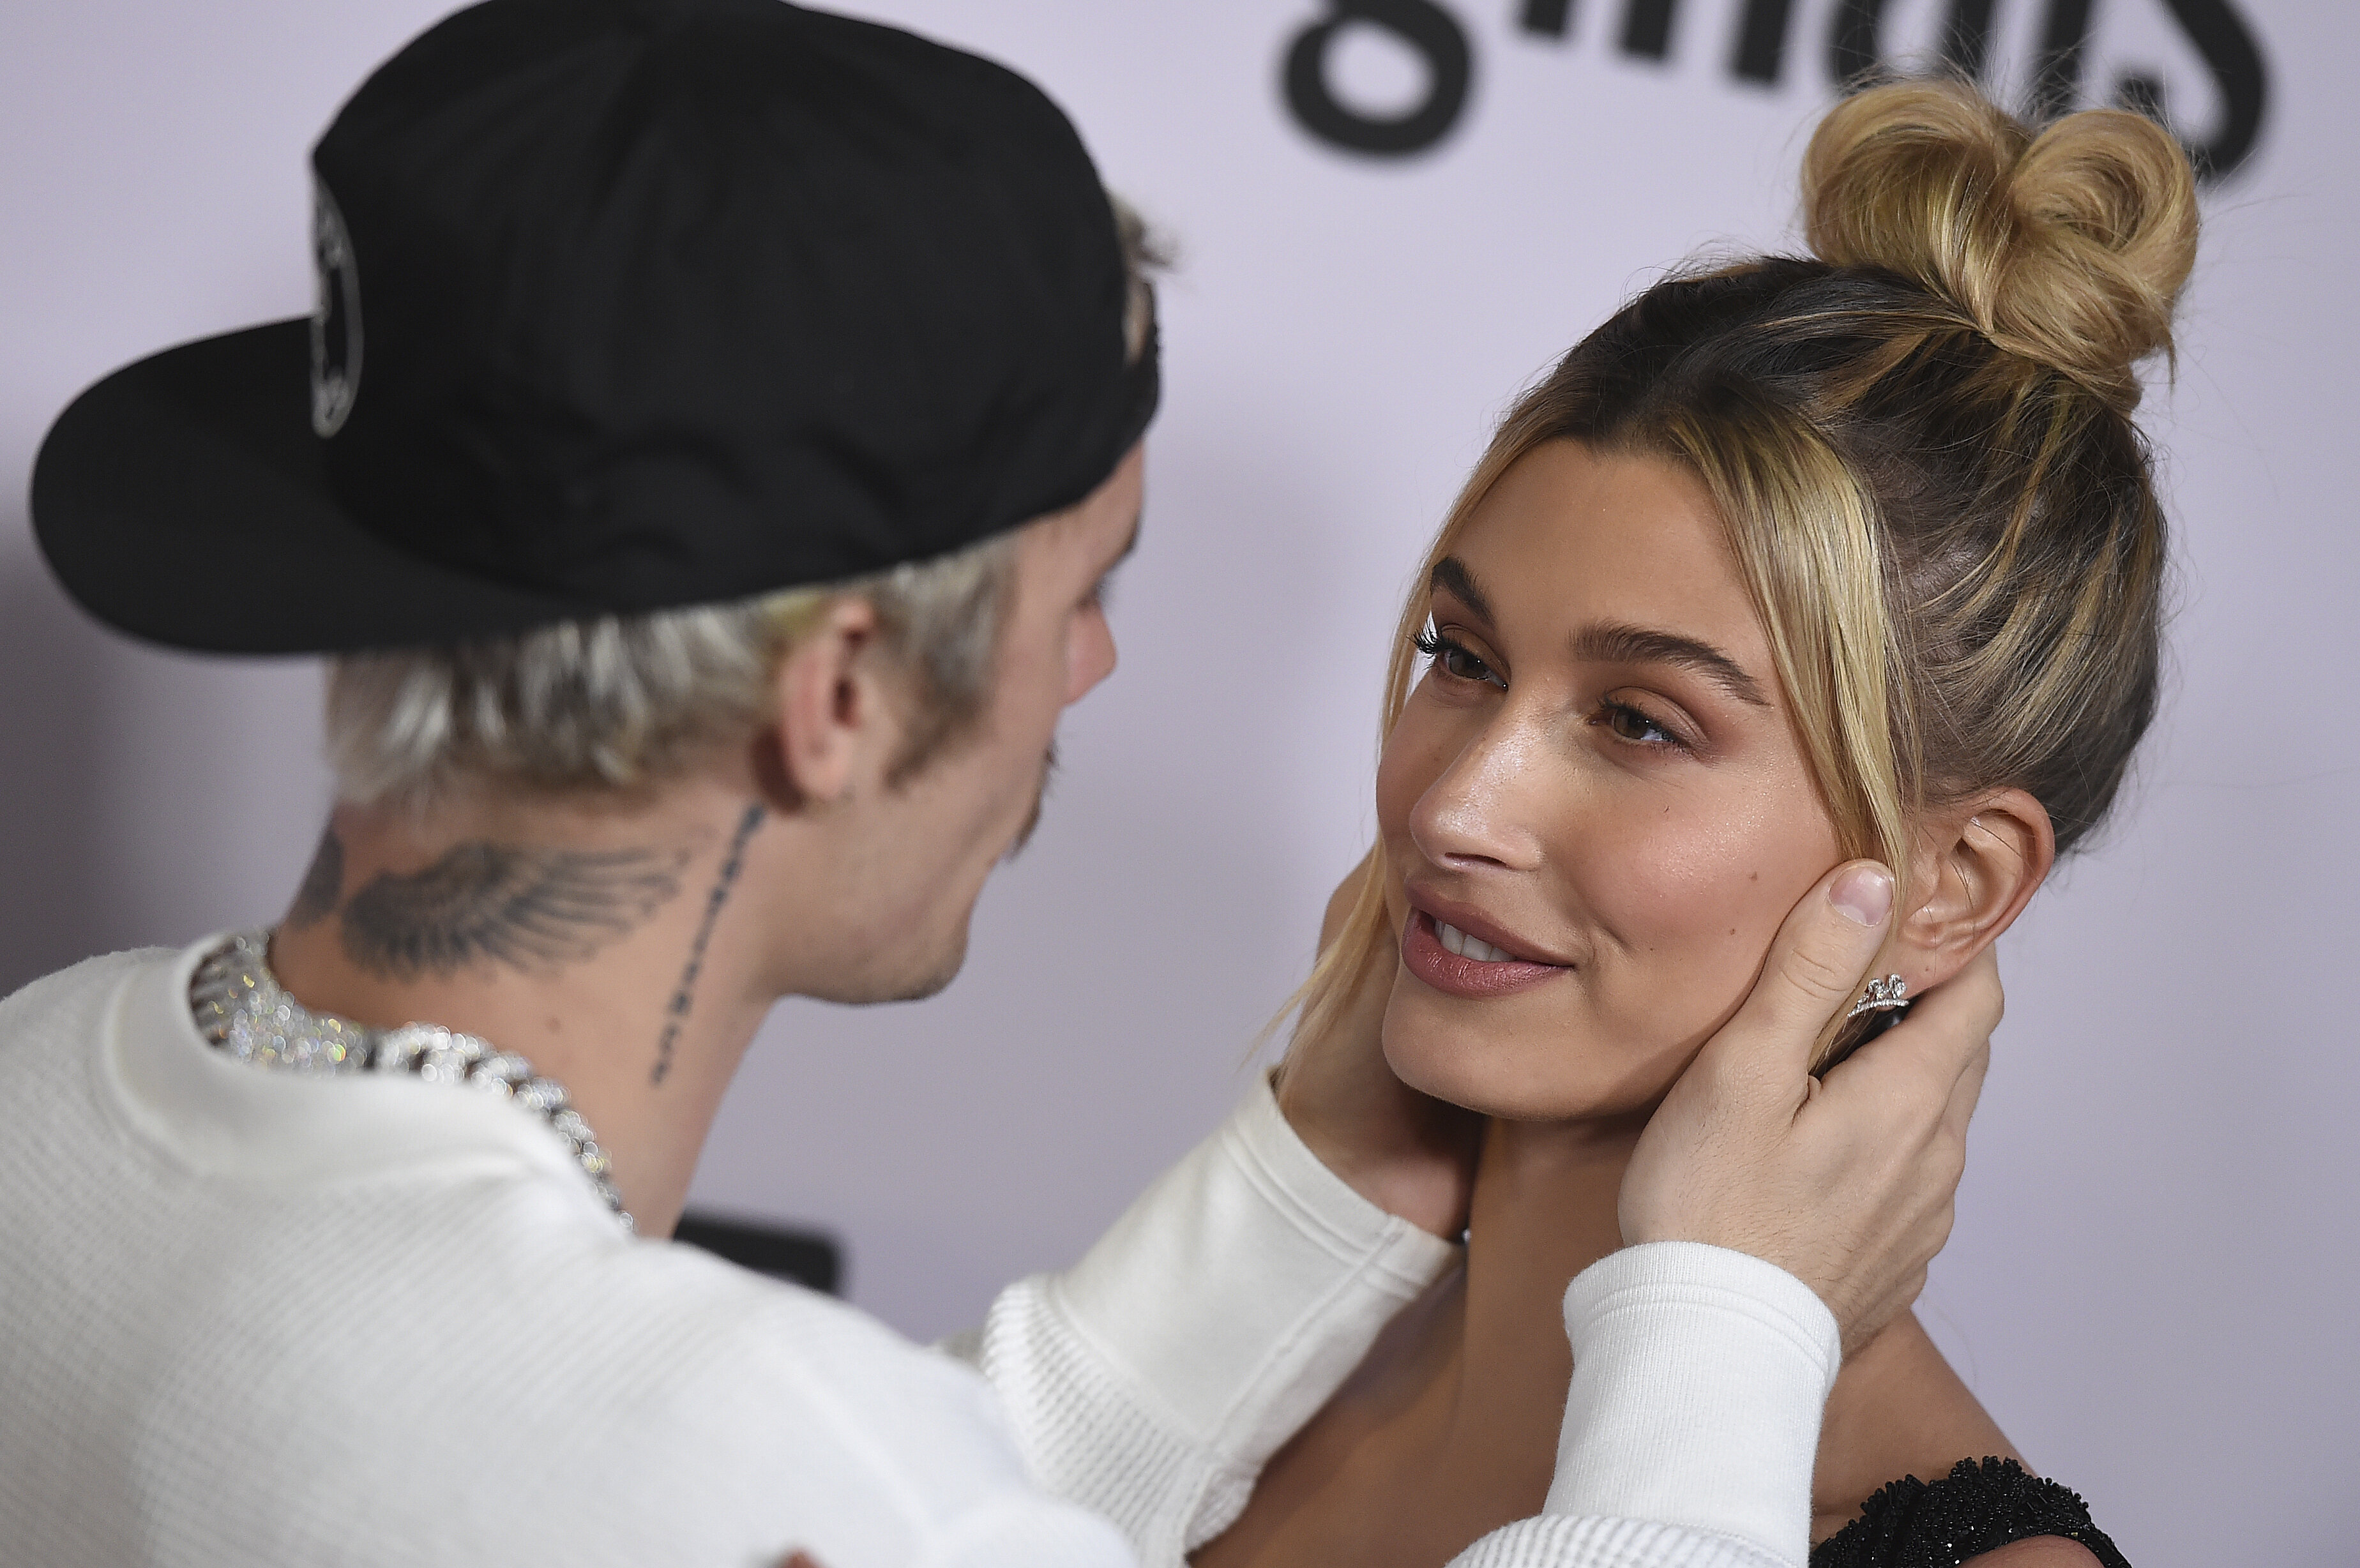 Justin Bieber Suggests Sex With Wife Hailey Baldwin Gets Pretty Crazy HuffPost Entertainment